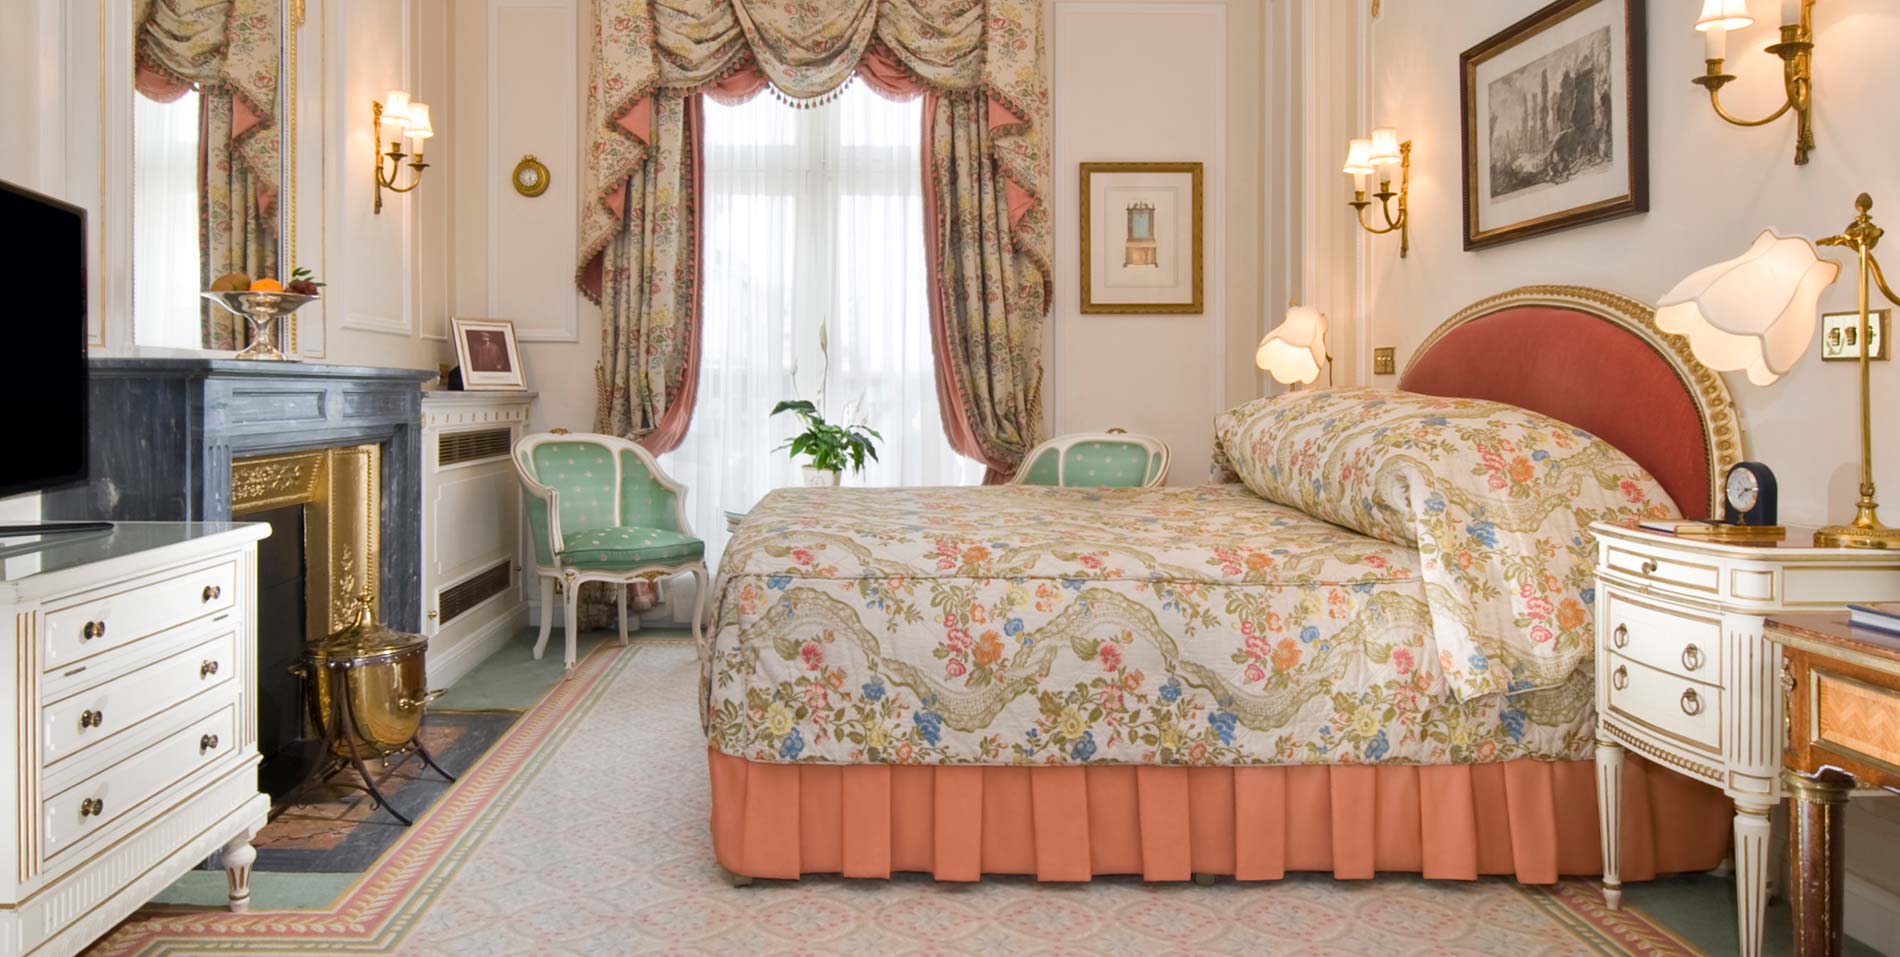 5 Star Luxury Hotel Rooms In Mayfair The Ritz London Hotel